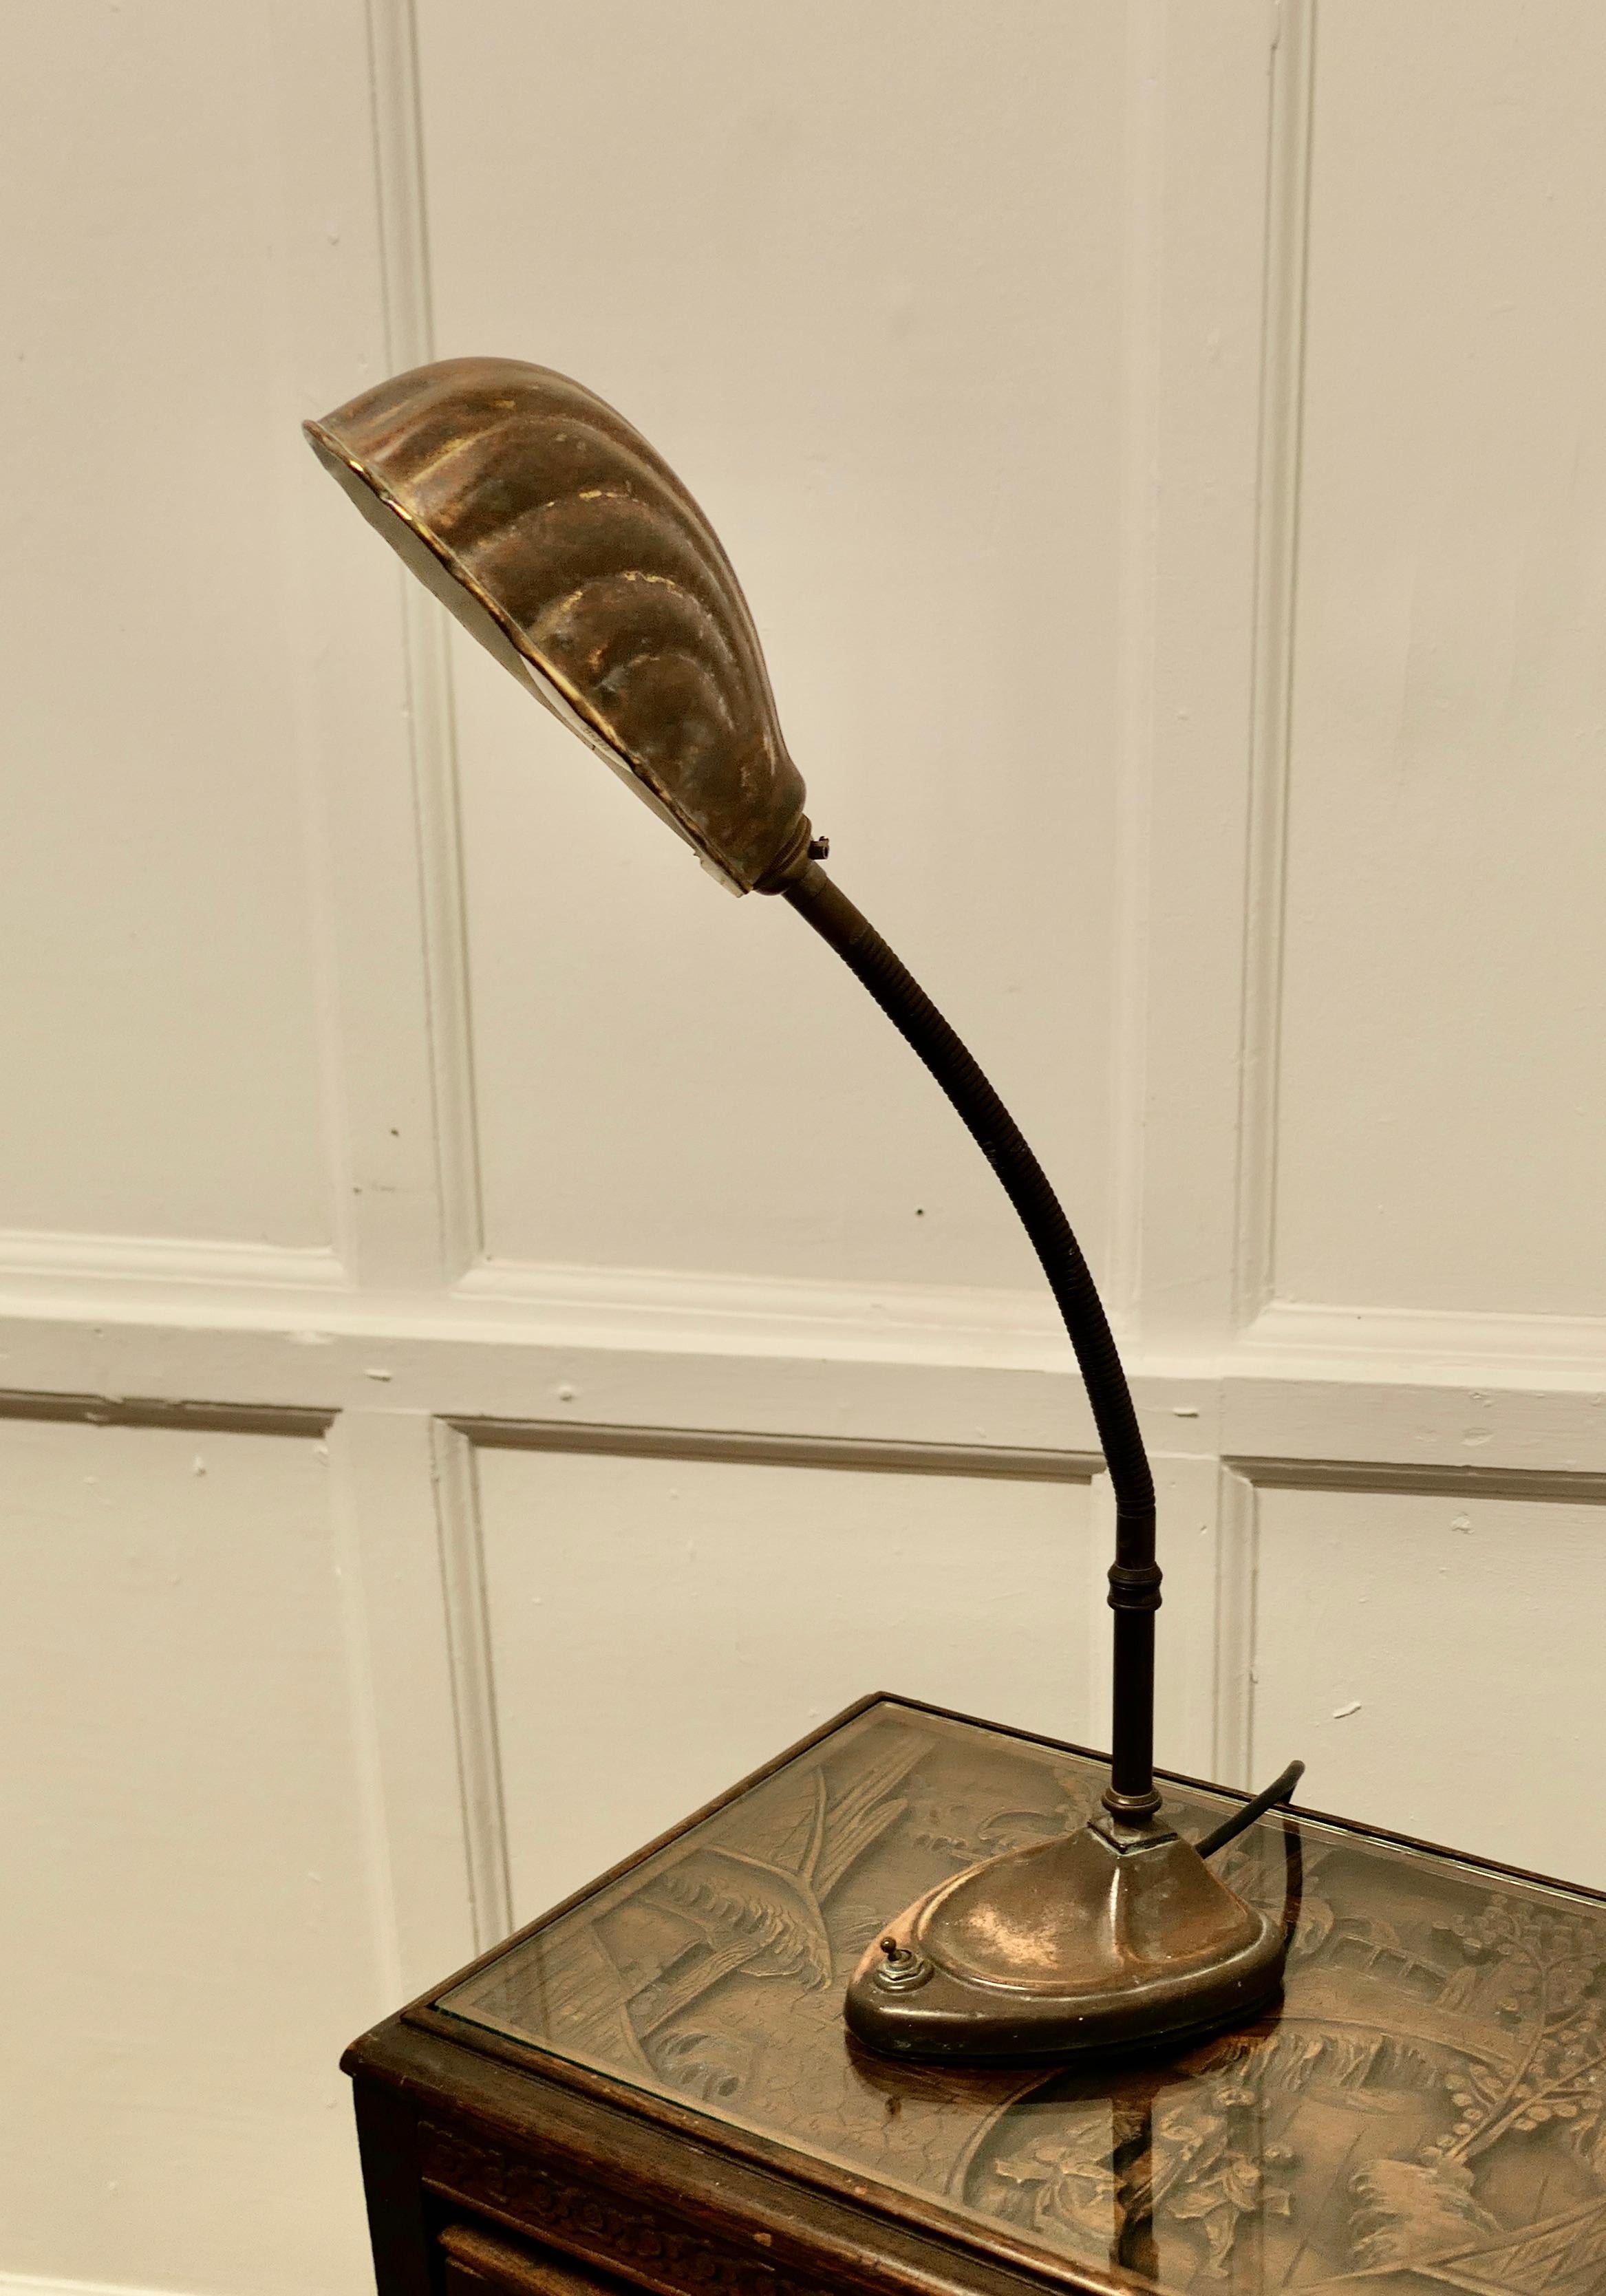 A traditional copper banker’s desk lamp

A Traditional Age Darkened Copper Banker’s Desk Lamp
The Lamp is fully adjustable with its bendy coil and it is in good condition and working,
The base of the lamp is 6” is 7” x 5” and the adjustable coil